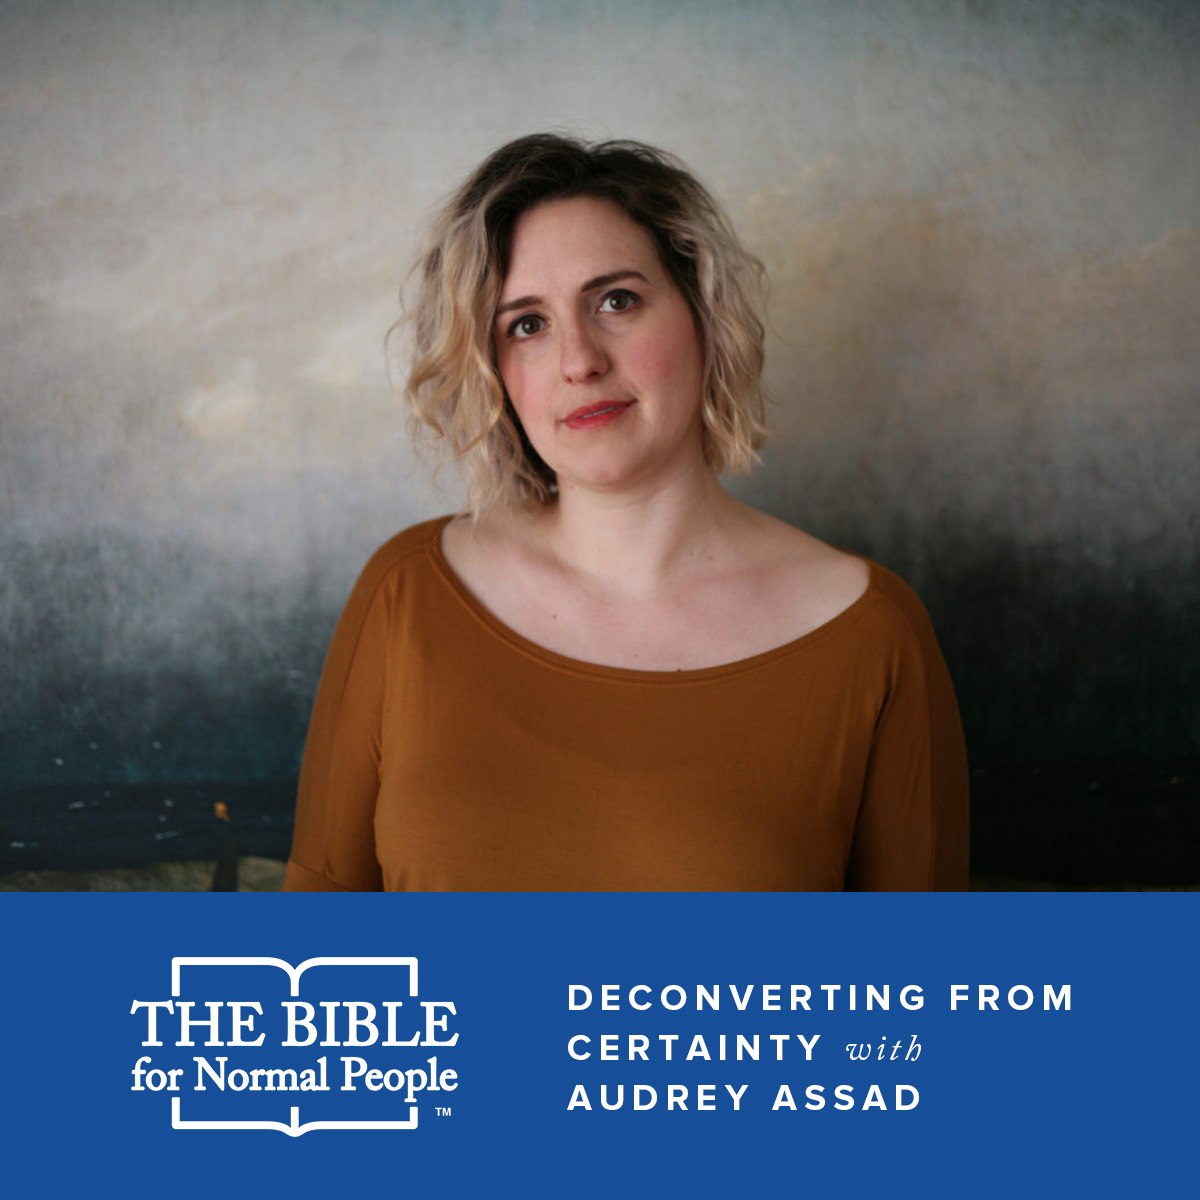 Interview with with Audrey Assad: Deconverting from Certainty